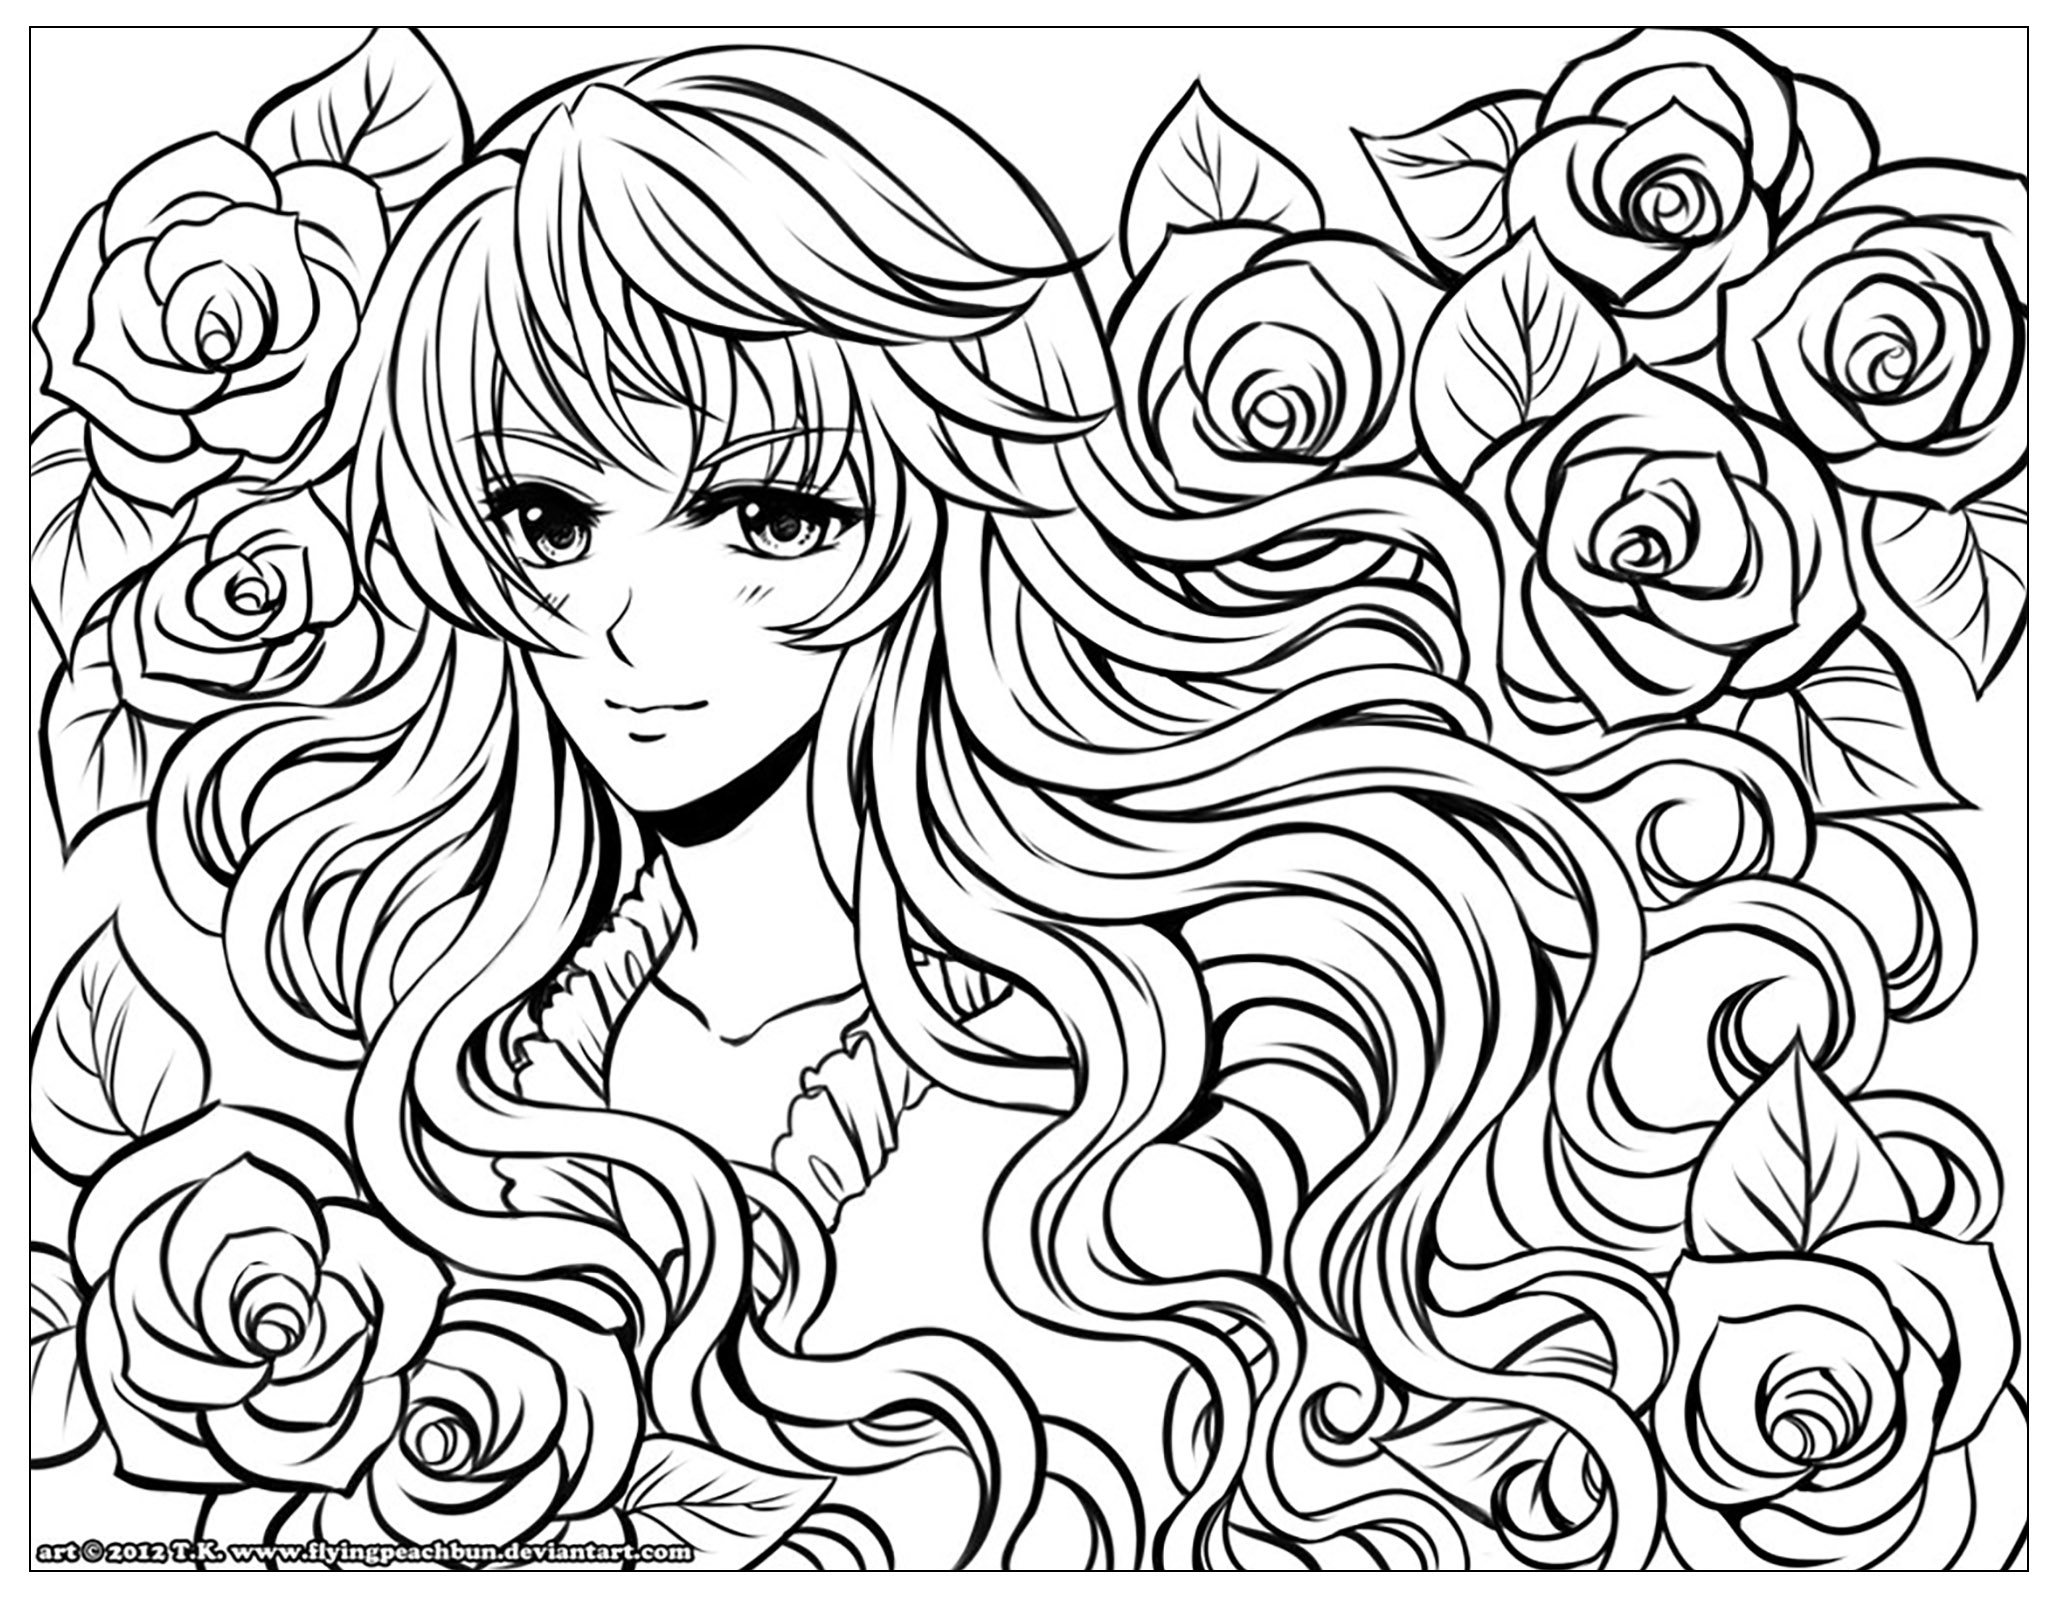 Manga to color for children   Manga Kids Coloring Pages